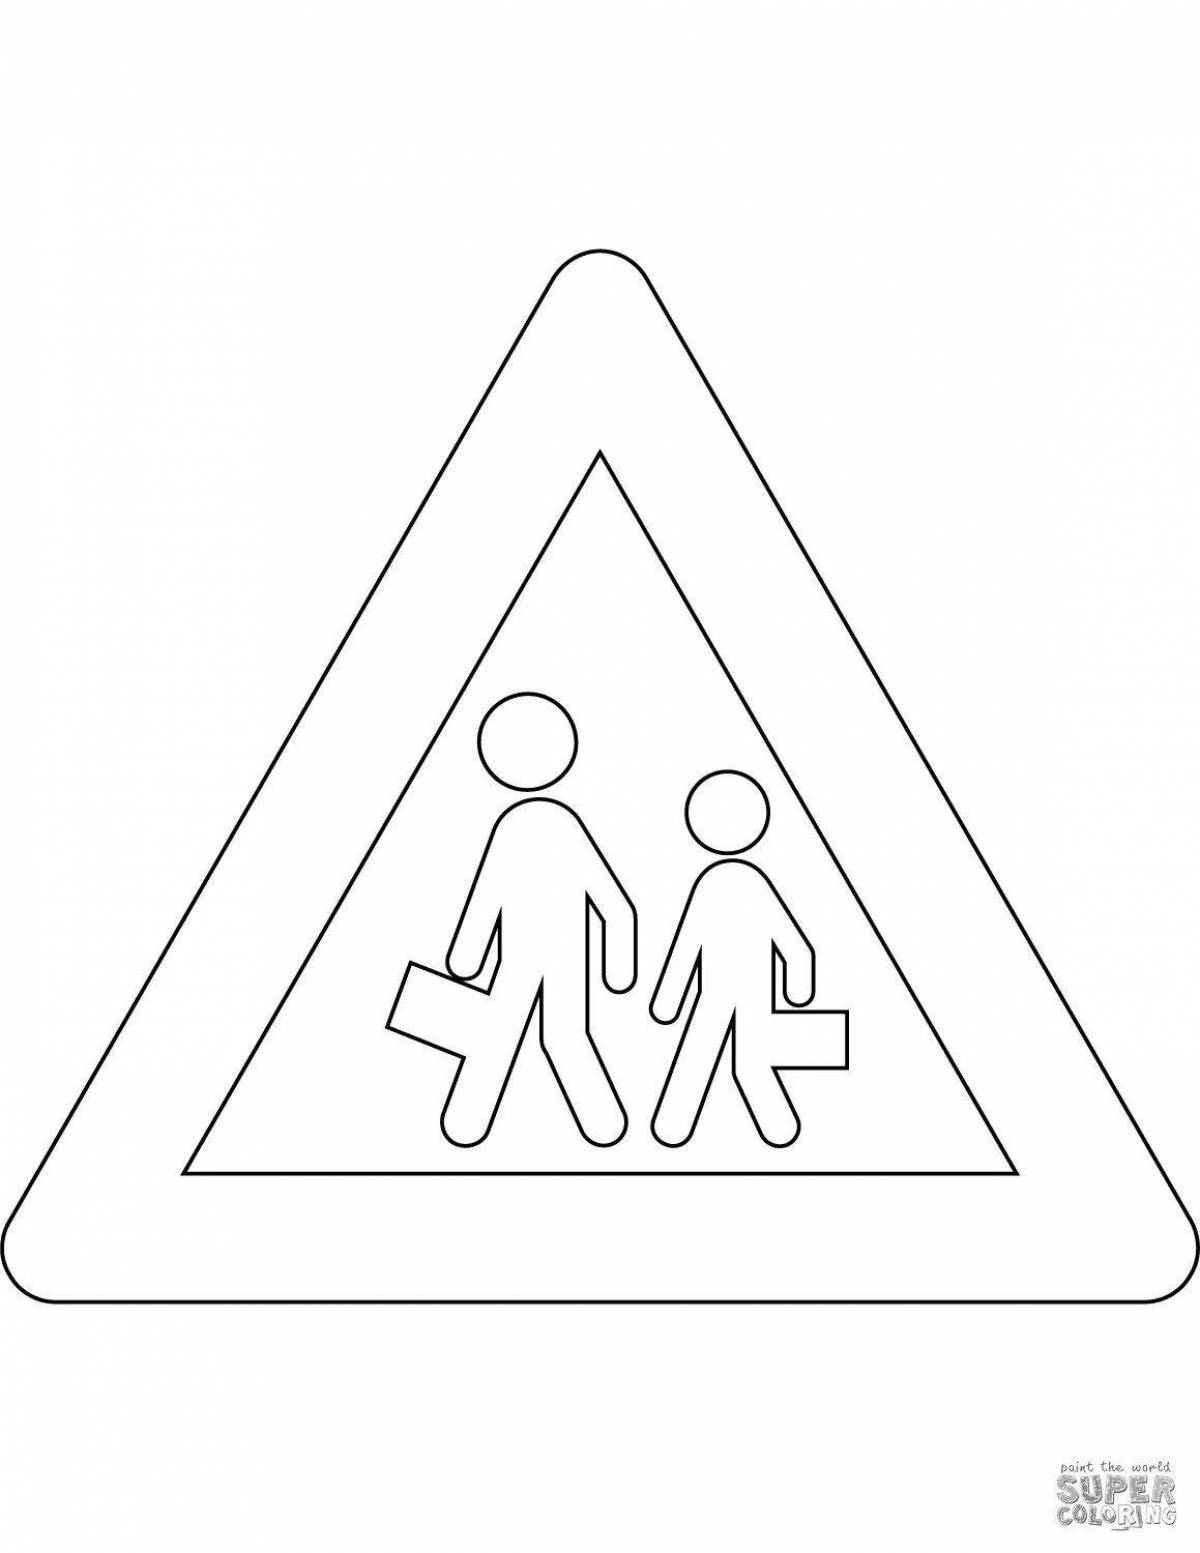 Caution road sign coloring page for children